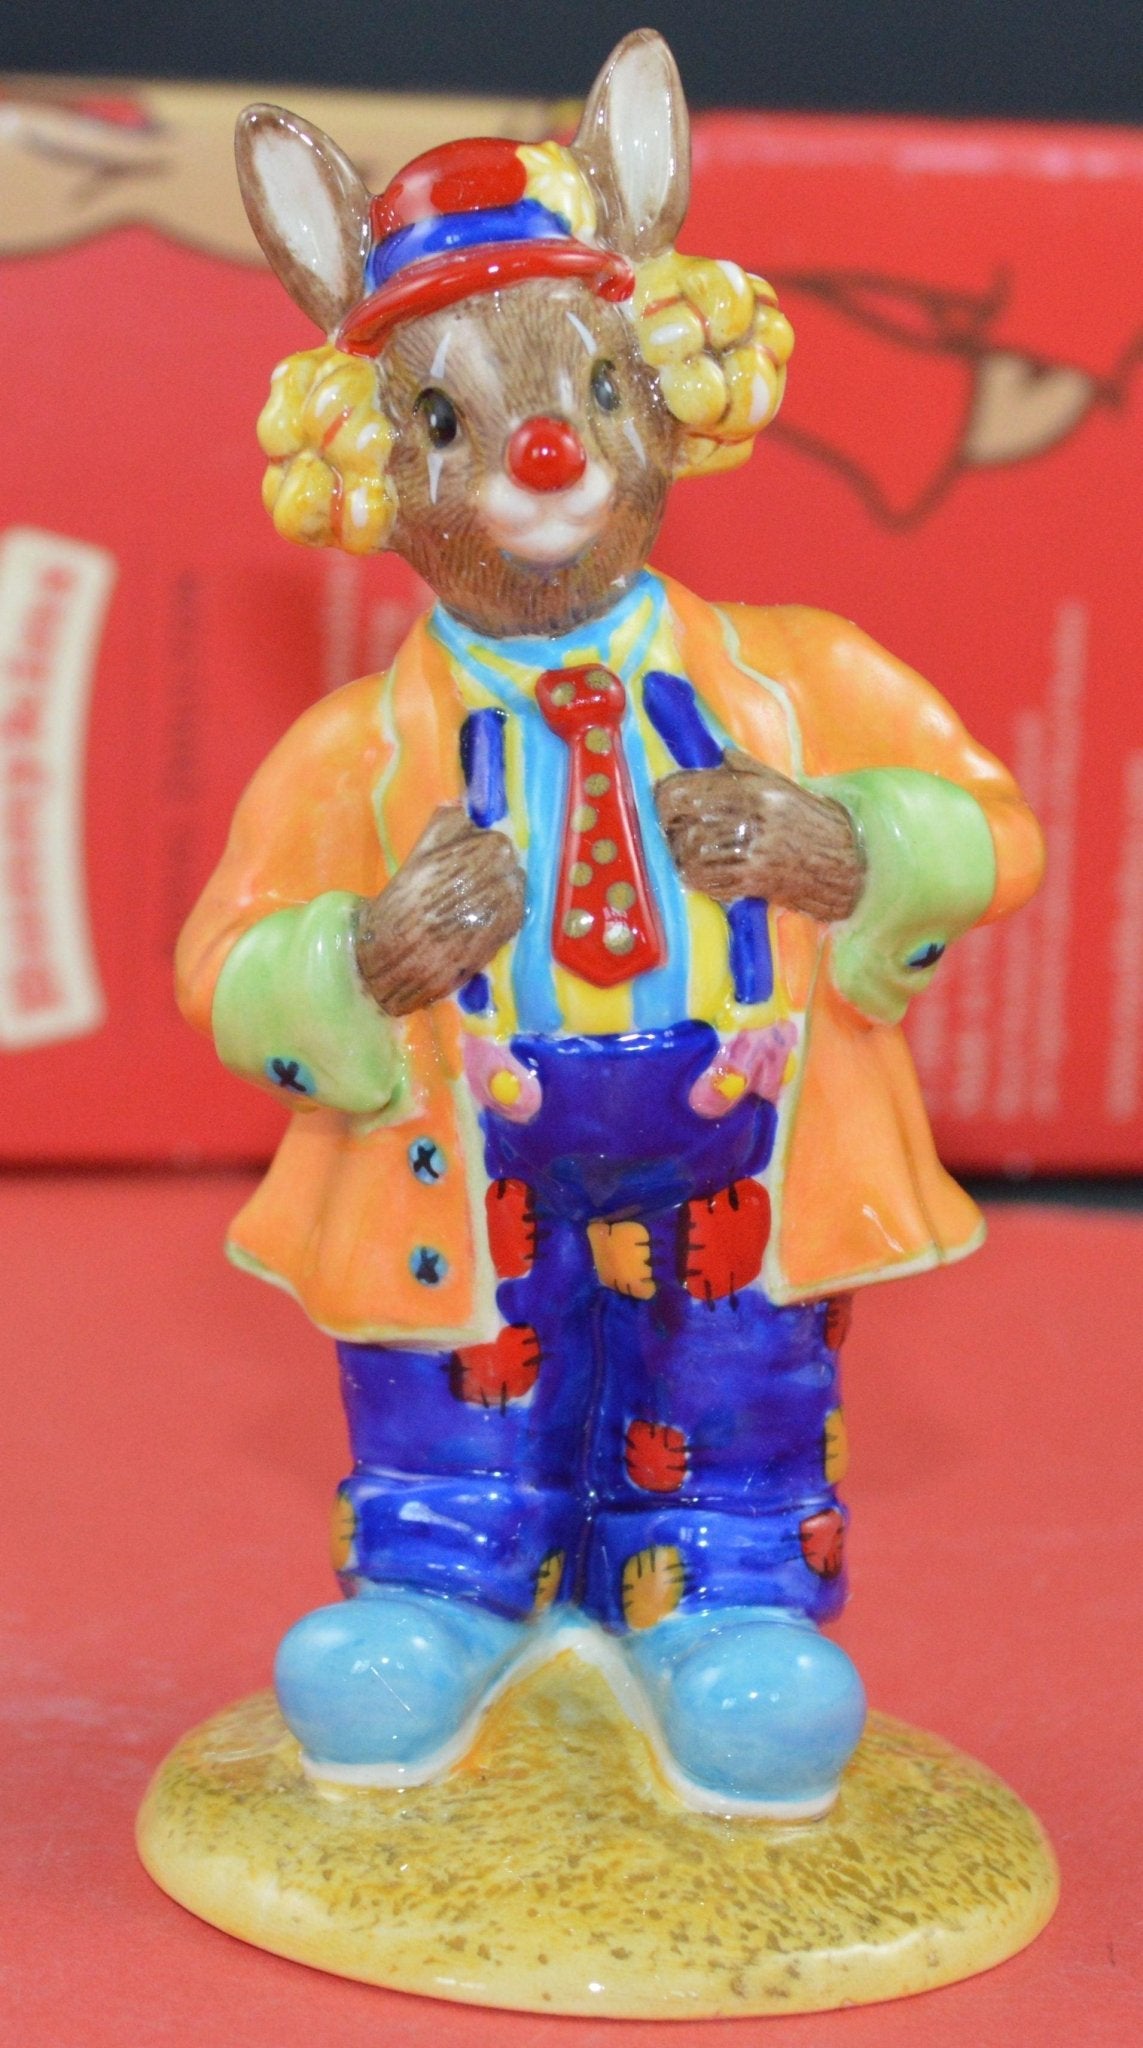 BOXED ROYAL DOULTON BUNNYKINS CLARENCE THE CLOWN DB332 (PREVIOUSLY OWNED)VERY GOOD CONDITION - TMD167207